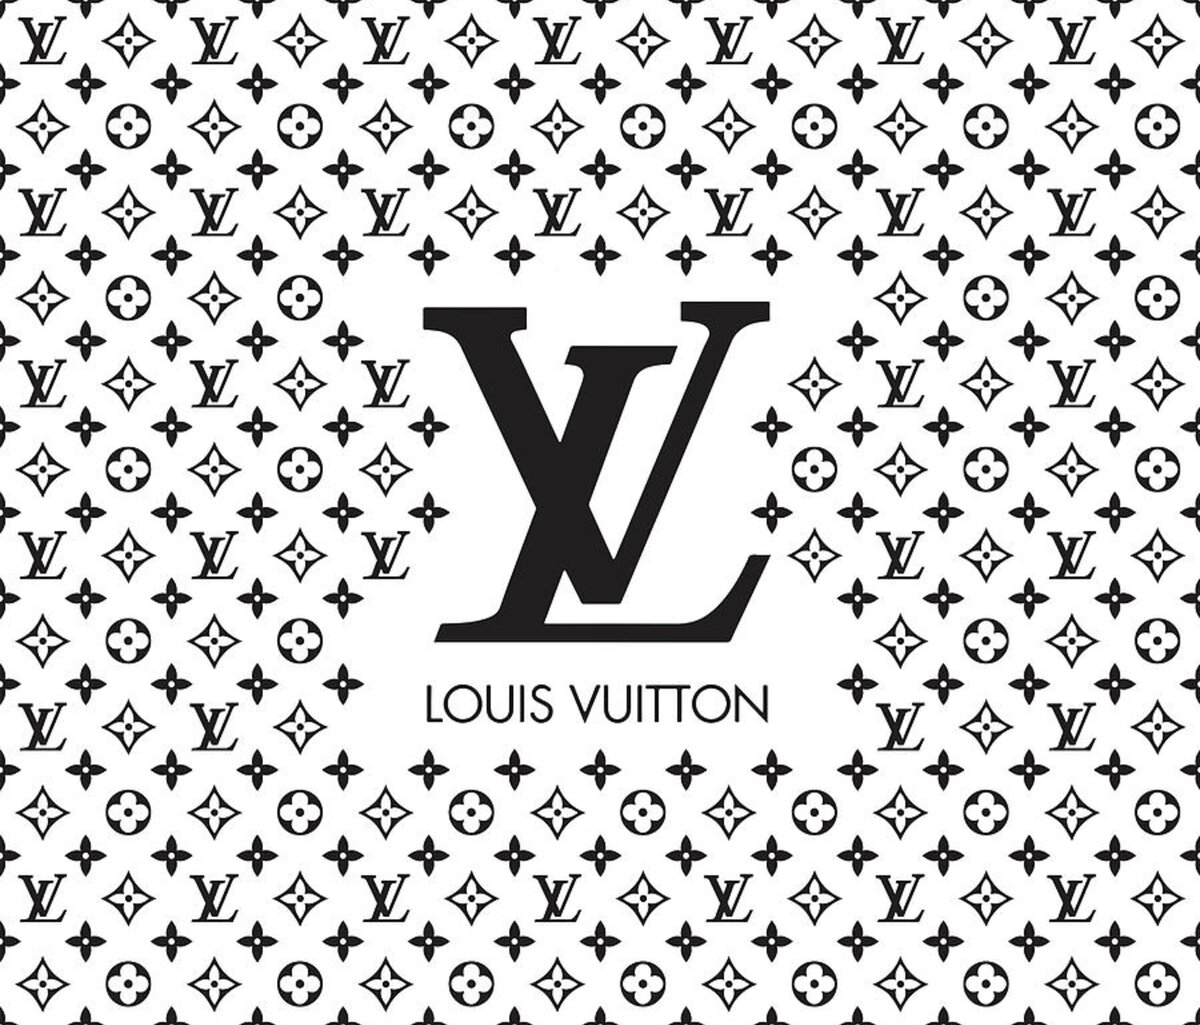 Louis Vuitton Pattern - LV Pattern 08 - Fashion and Lifestyle Tapestry ...